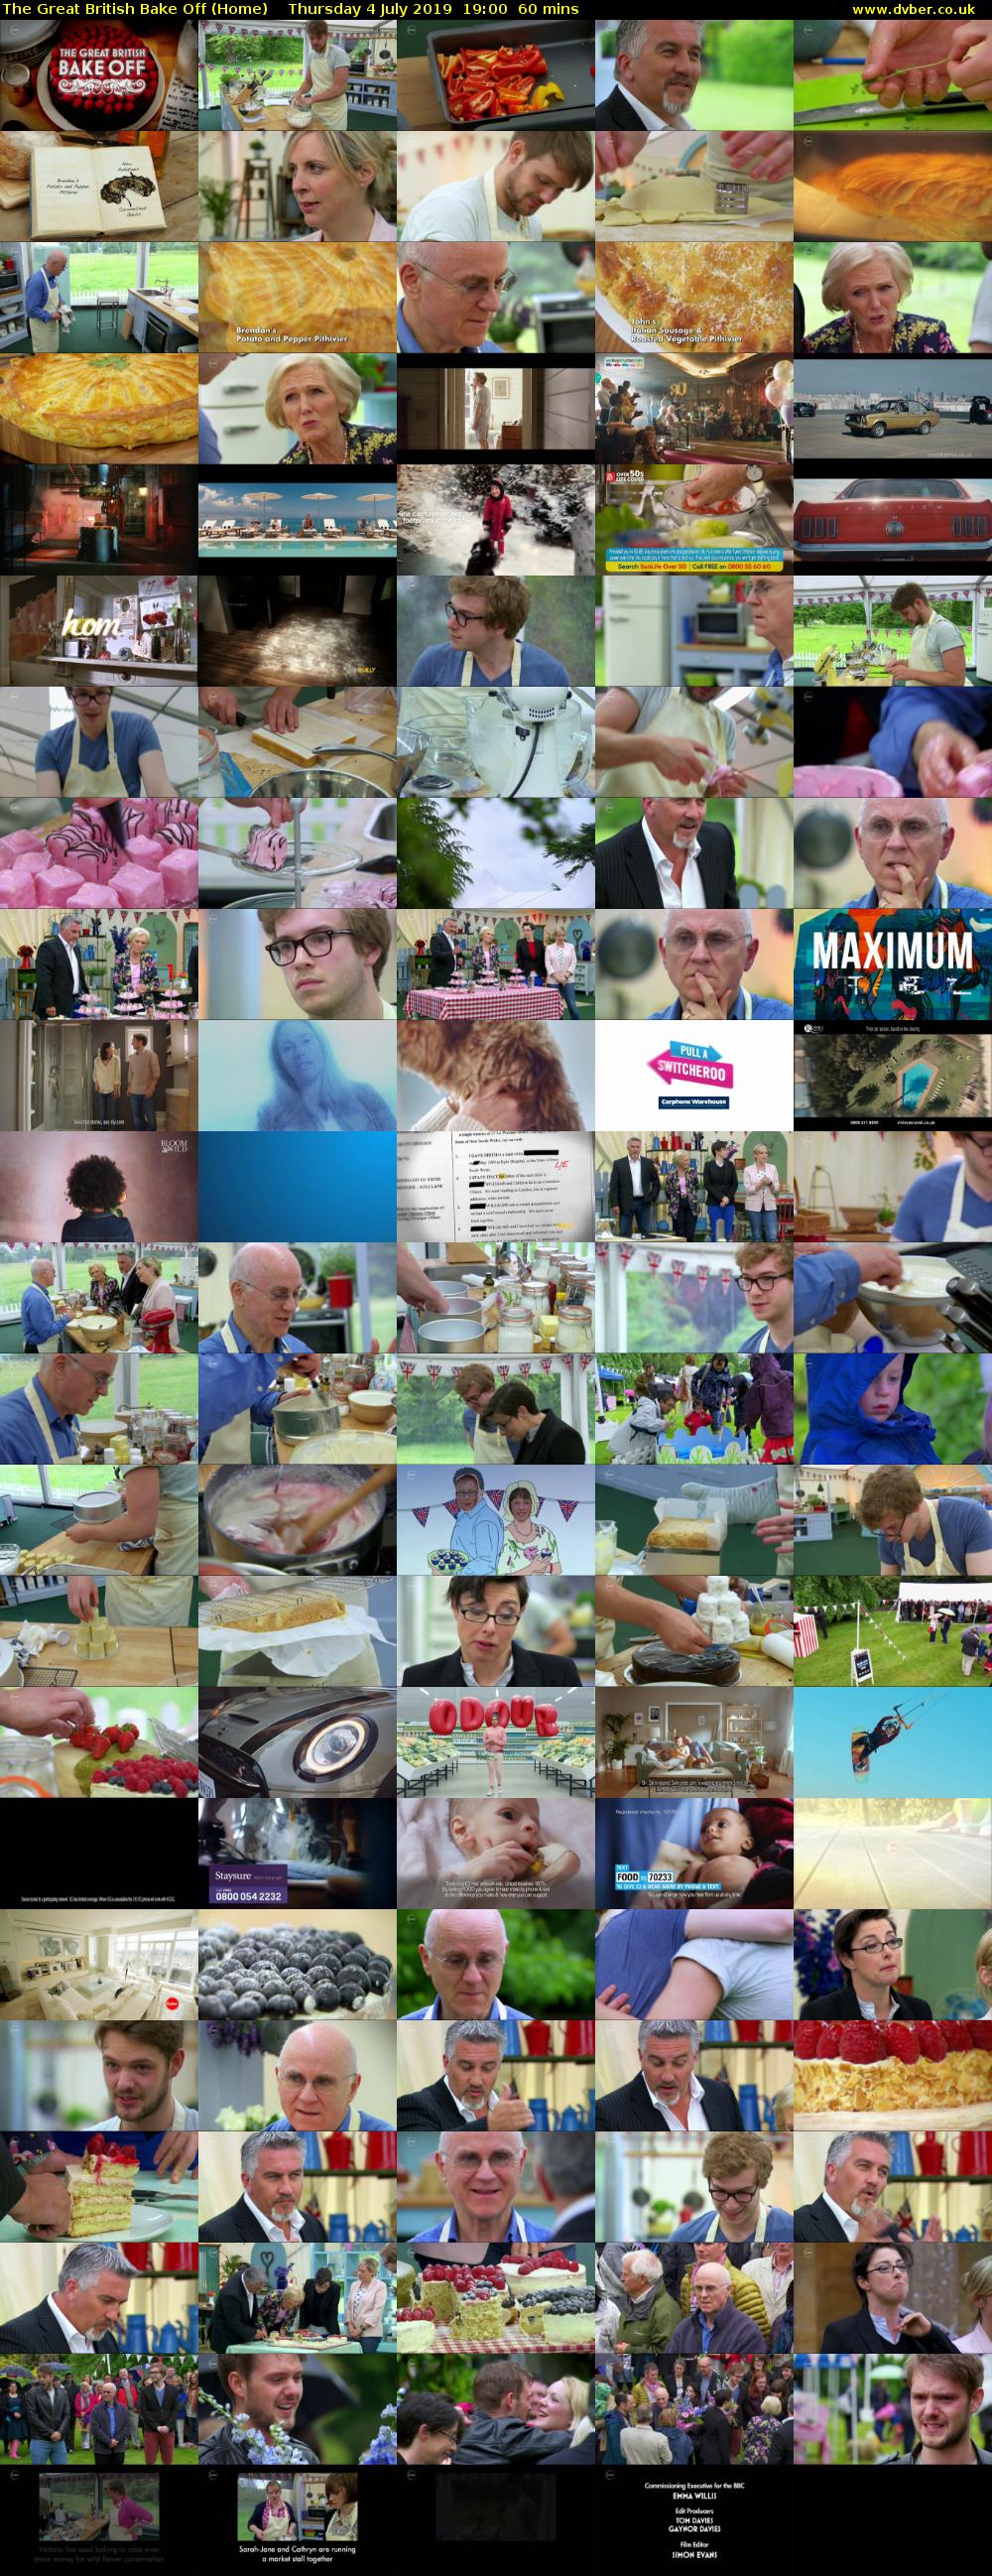 The Great British Bake Off (Home) Thursday 4 July 2019 19:00 - 20:00